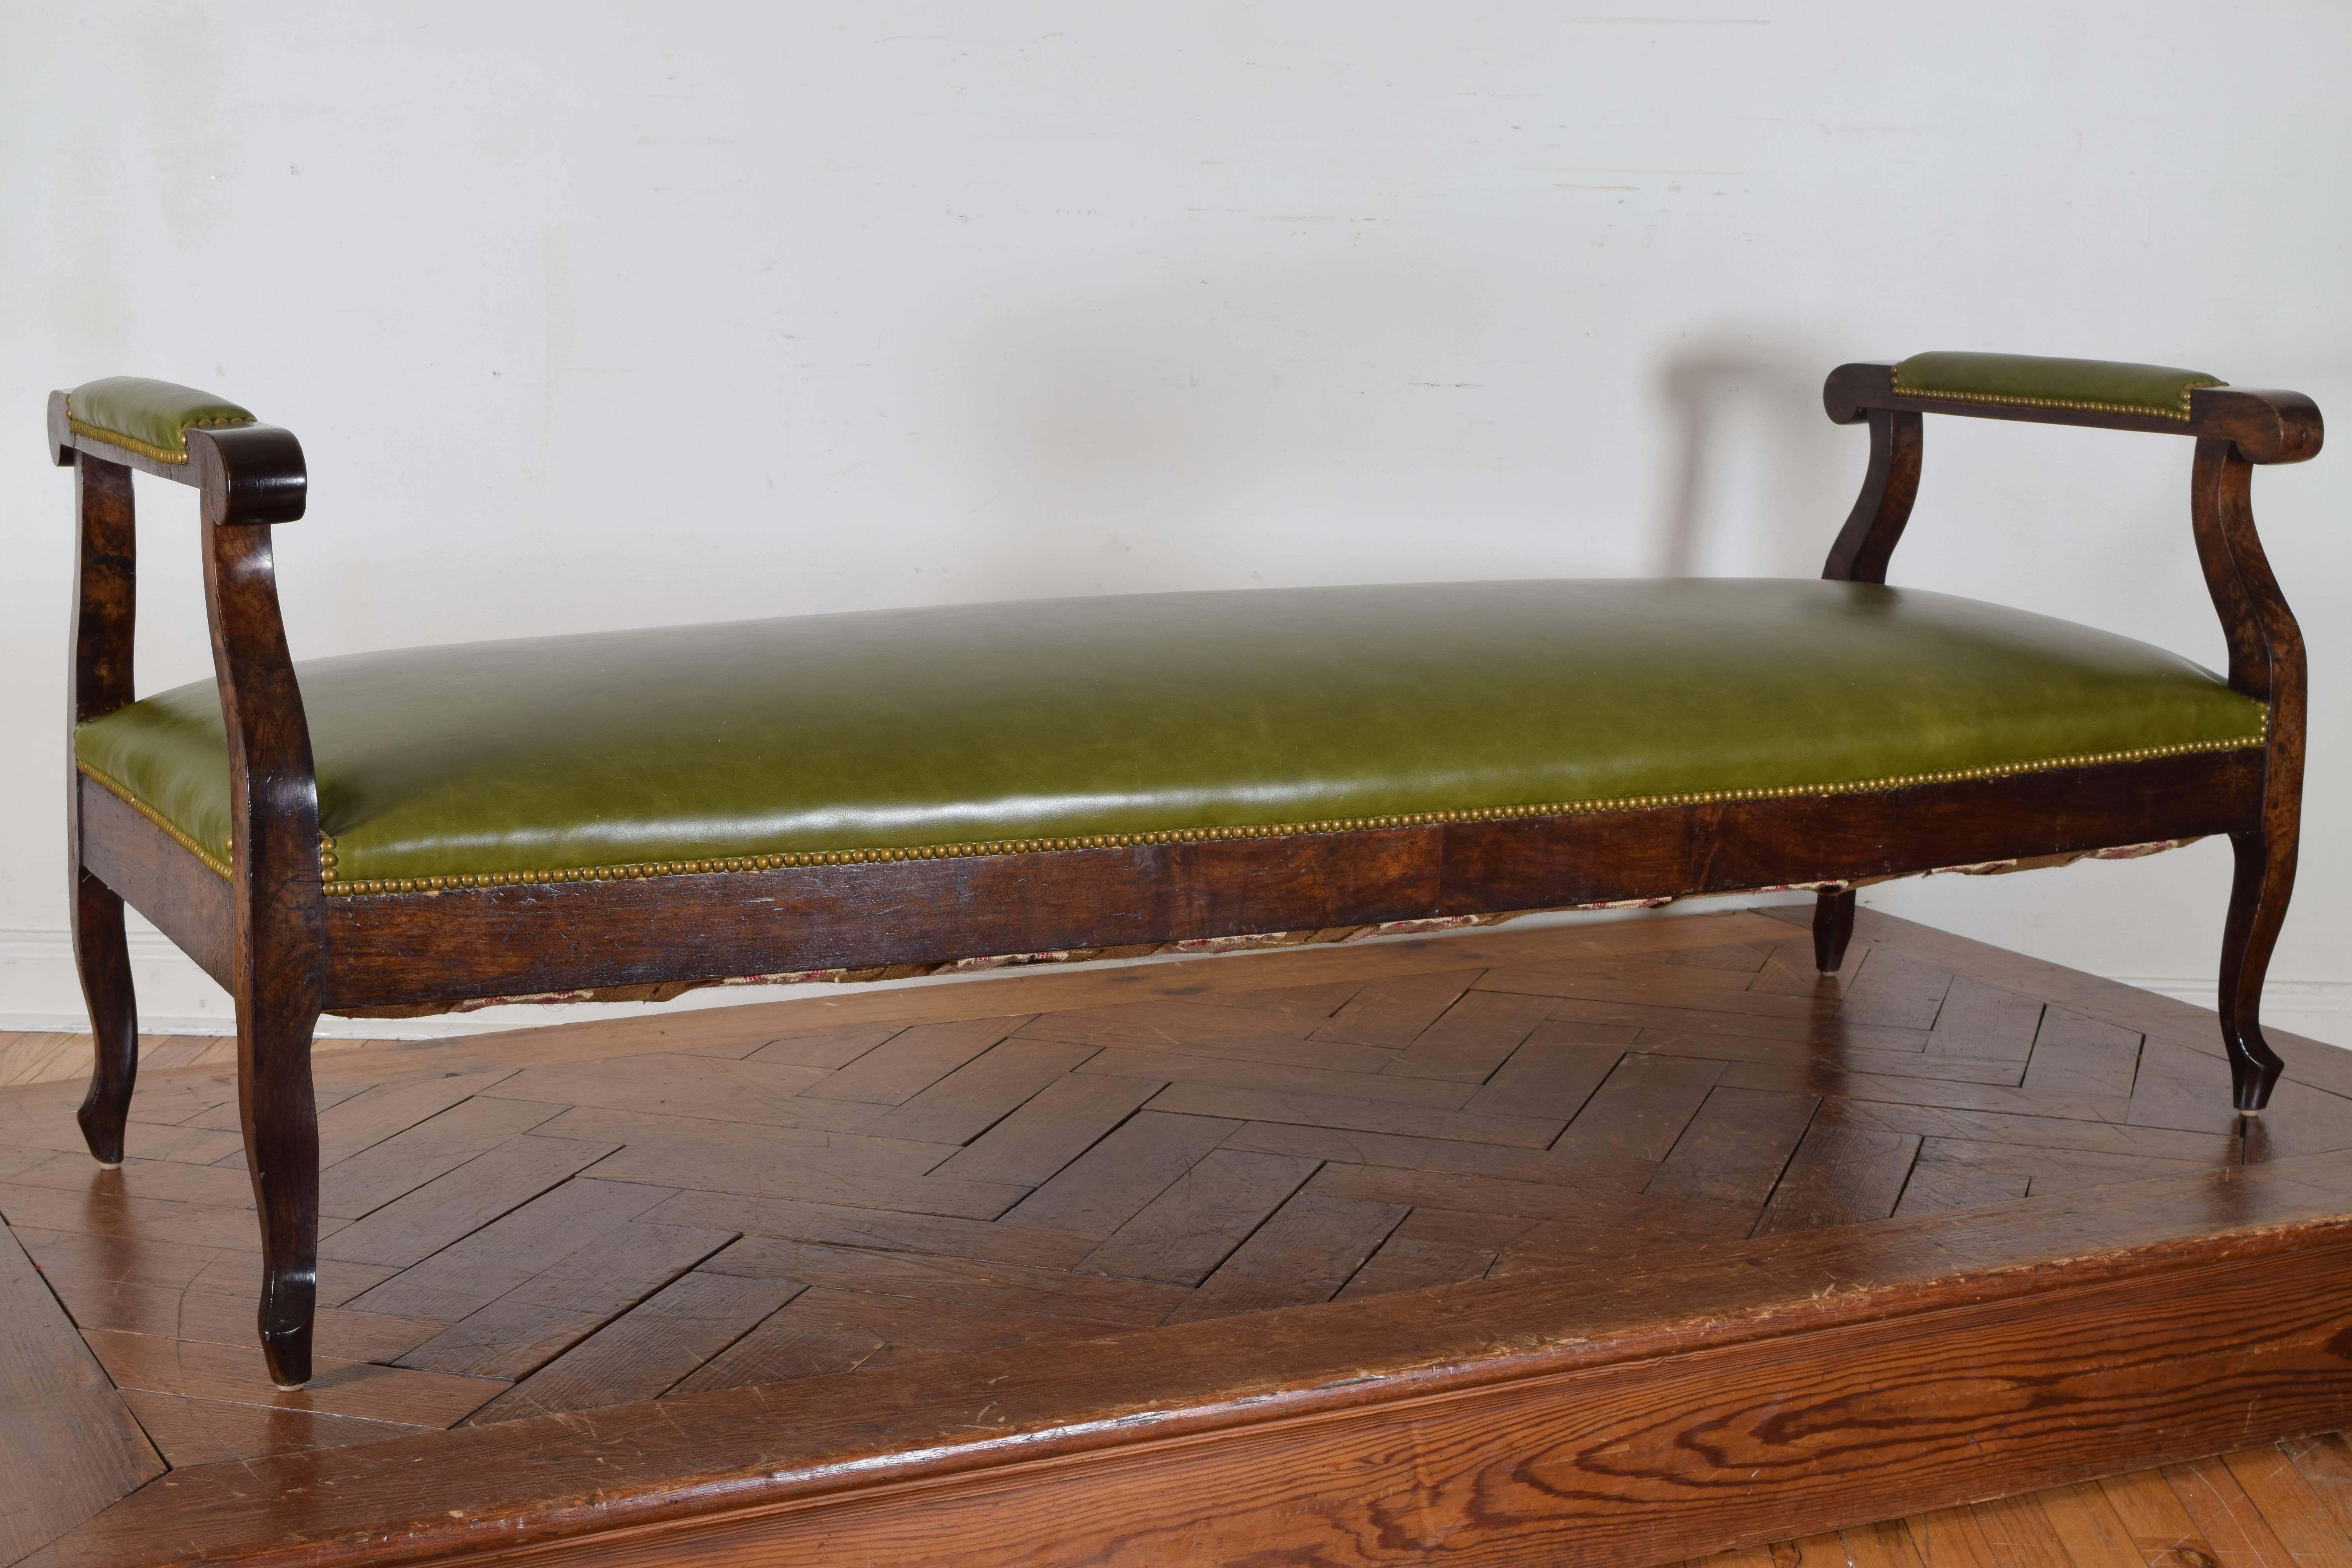 The rectangular bench having raised arms and upholstered in green leather trimmed in patinated brass nailheads, the legs are of cabriole form.